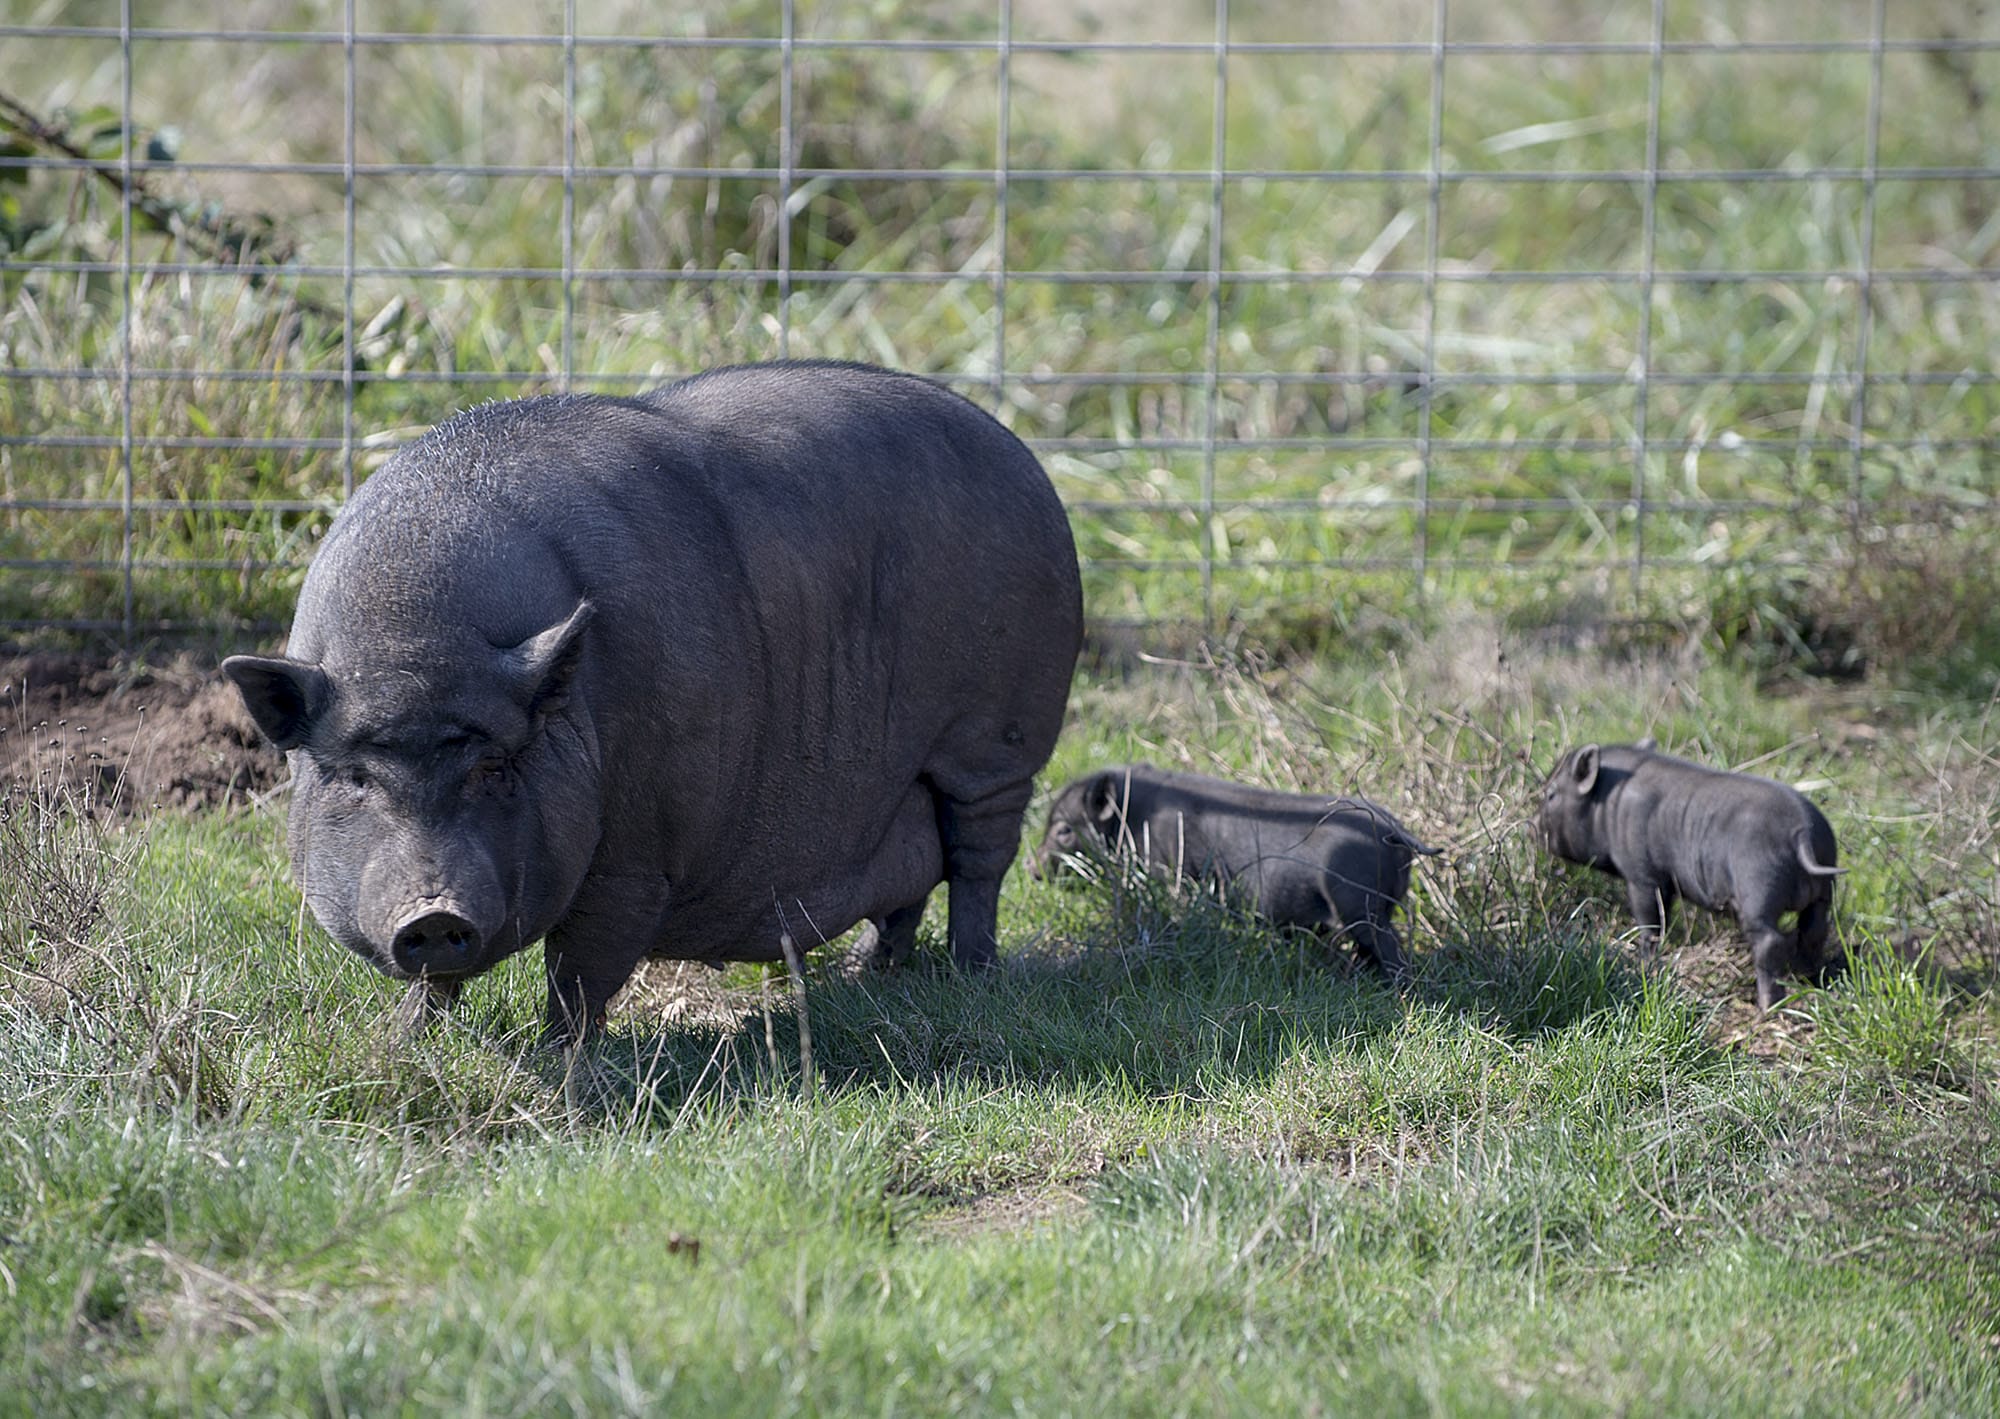 A mother pig and her two remaining piglets spend time Monday at Bi-Zi Farms in Brush Prairie. Her third piglet died over the weekend after being stolen from the farm. A second stolen piglet was found safe and brought back.